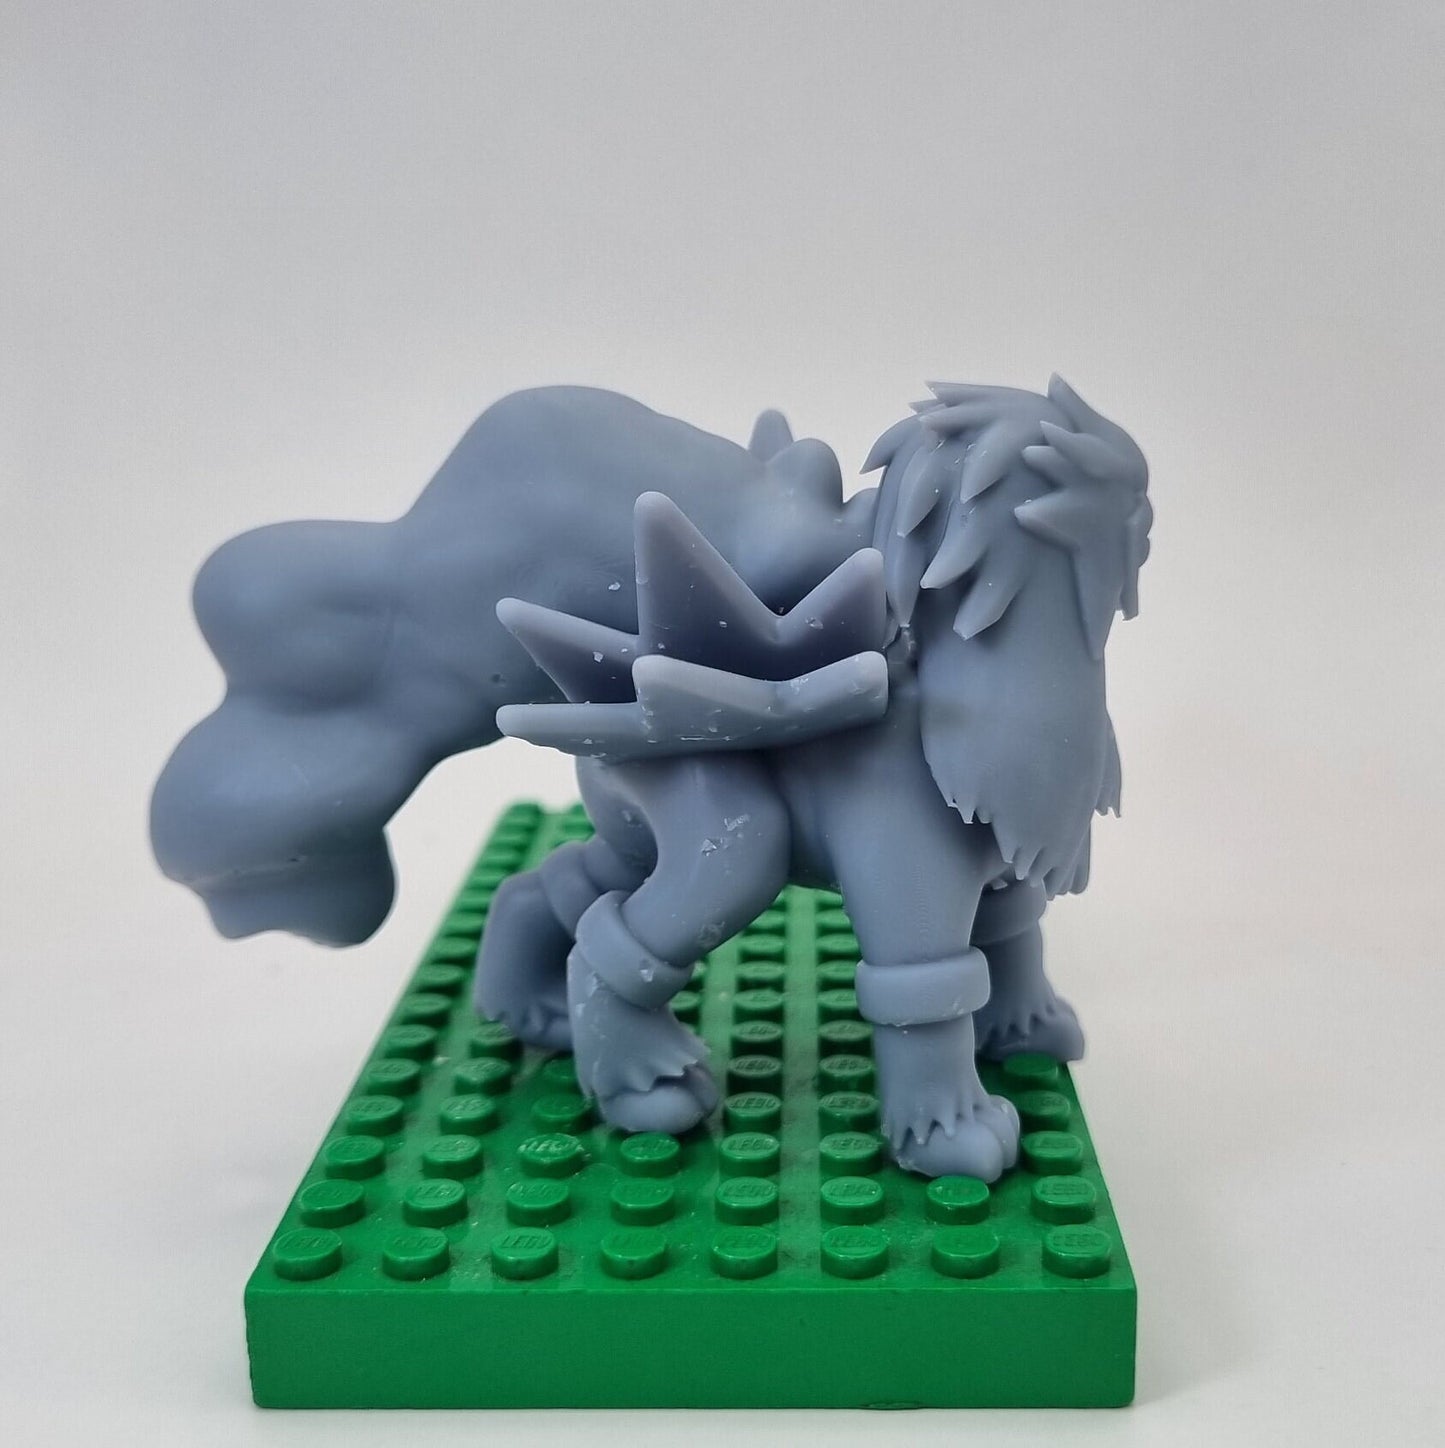 Building toy custom 3D printed animal to catch legandary fire dog